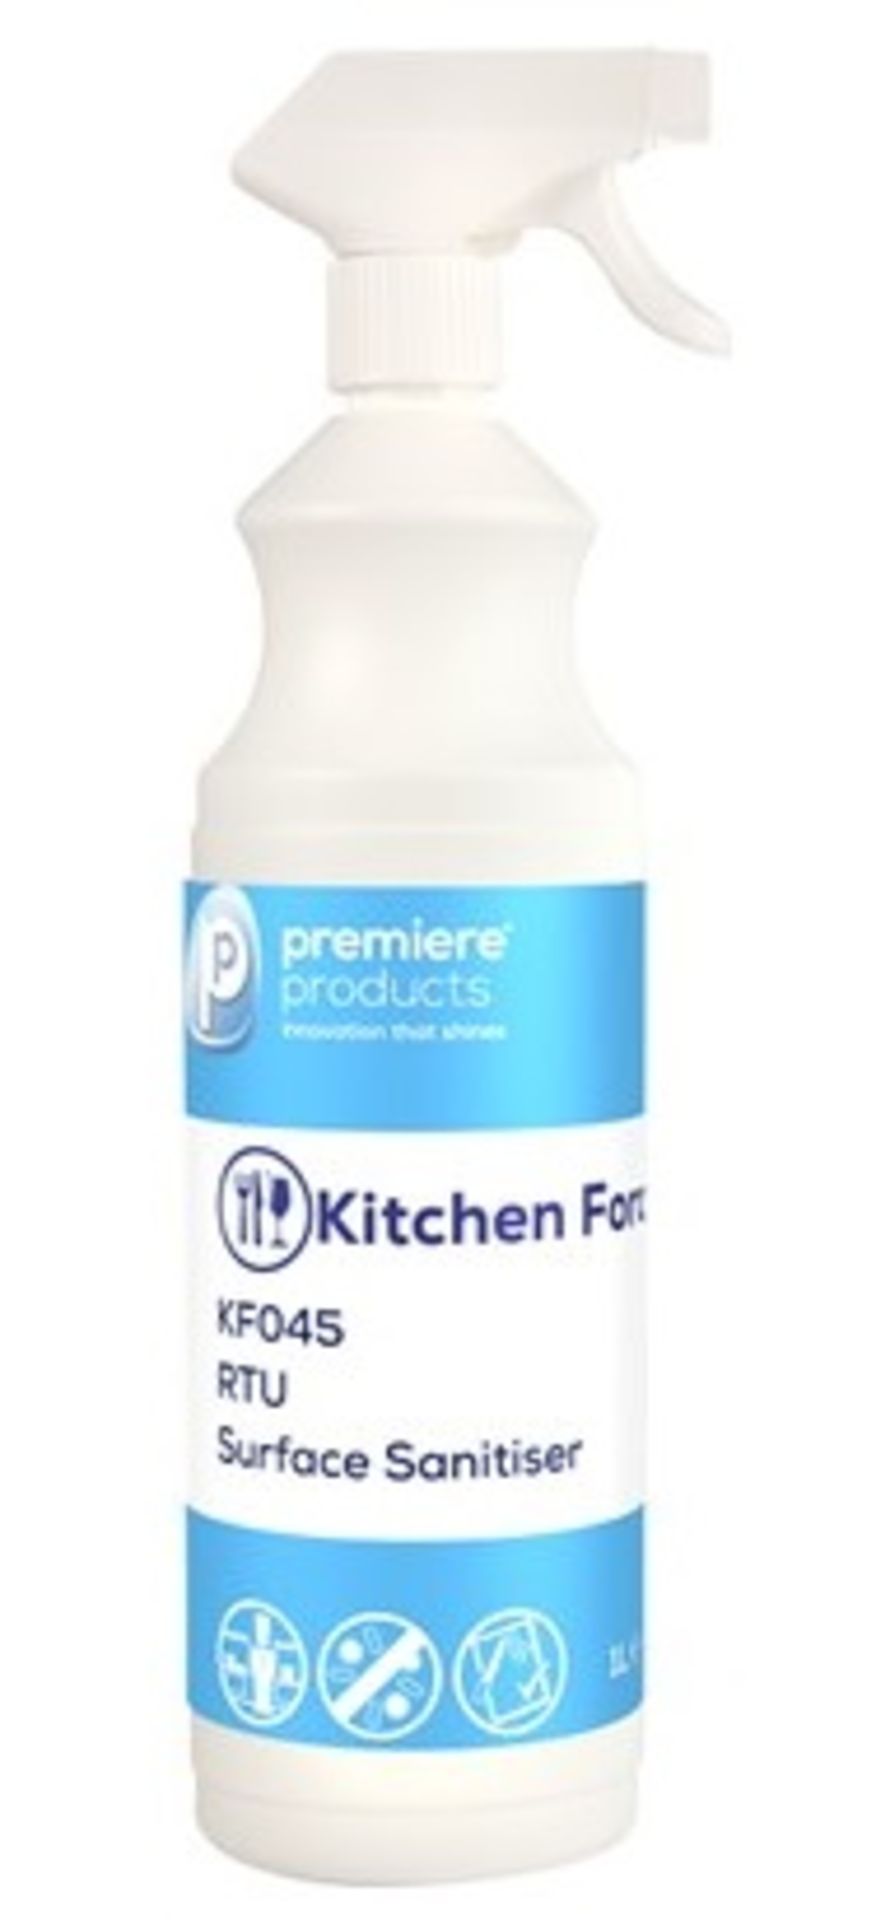 12 x Kitchen Force 1 Litre Surface Sanitiser -Premiere Products - Includes 12 x 1 Bottles Containers